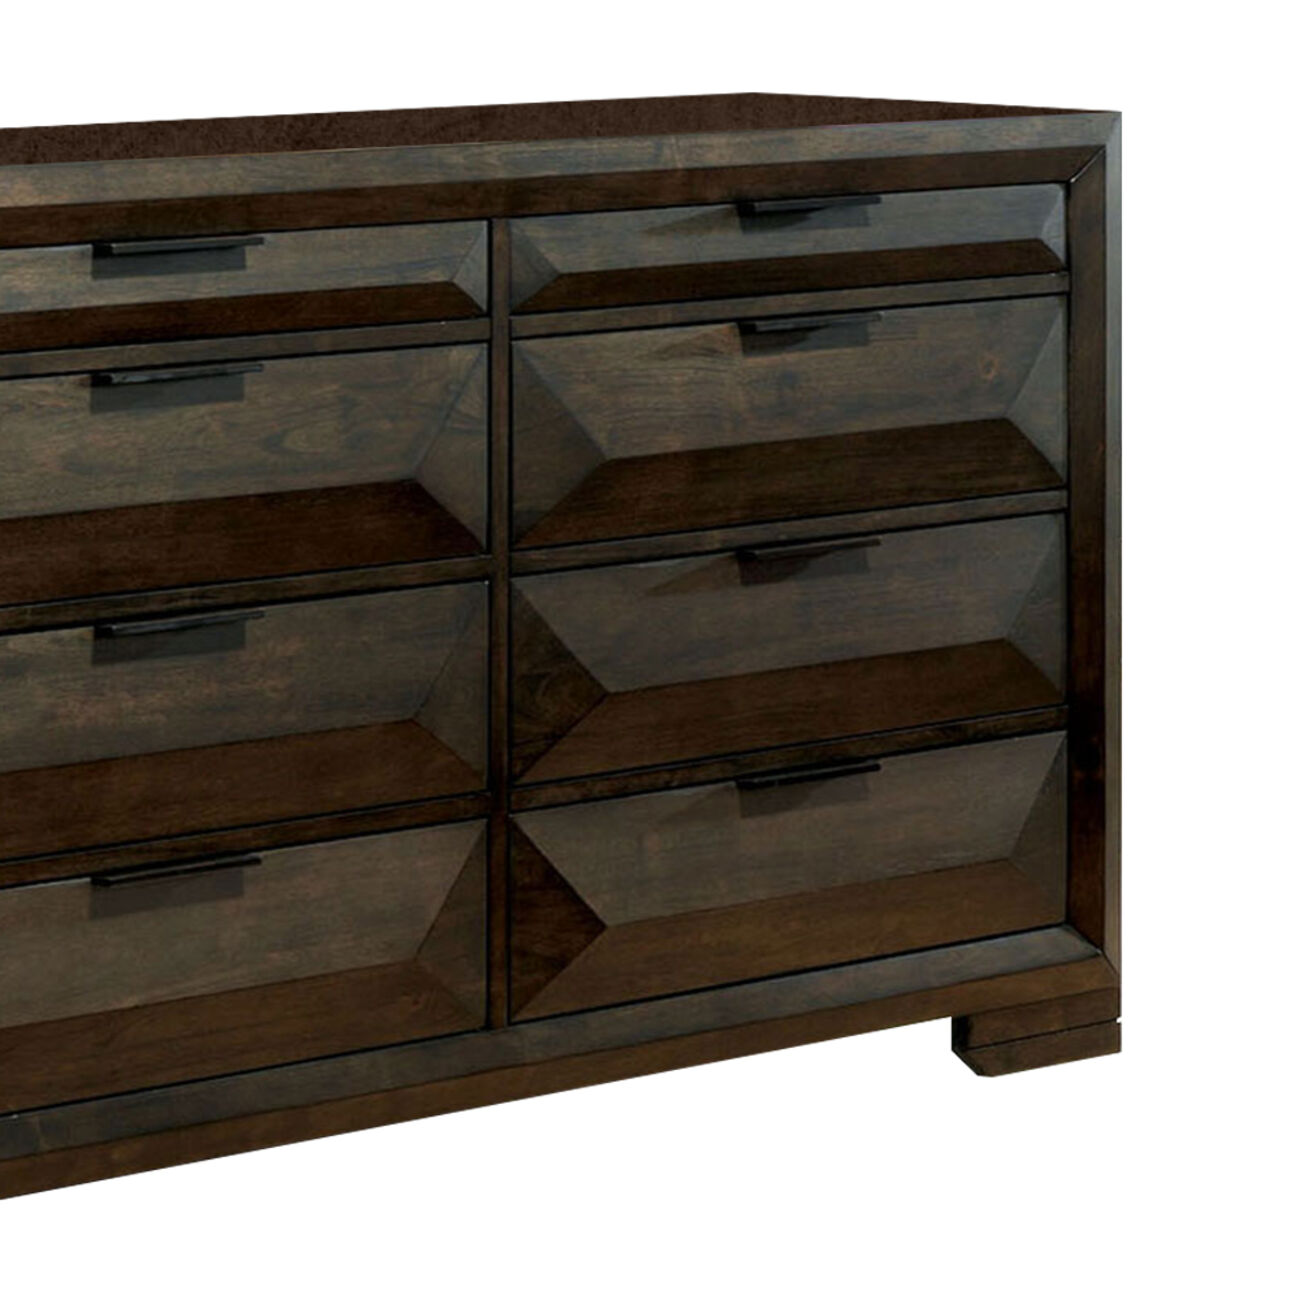 Wooden Dresser with 8 Drawers and Geometric Details, Espresso Brown